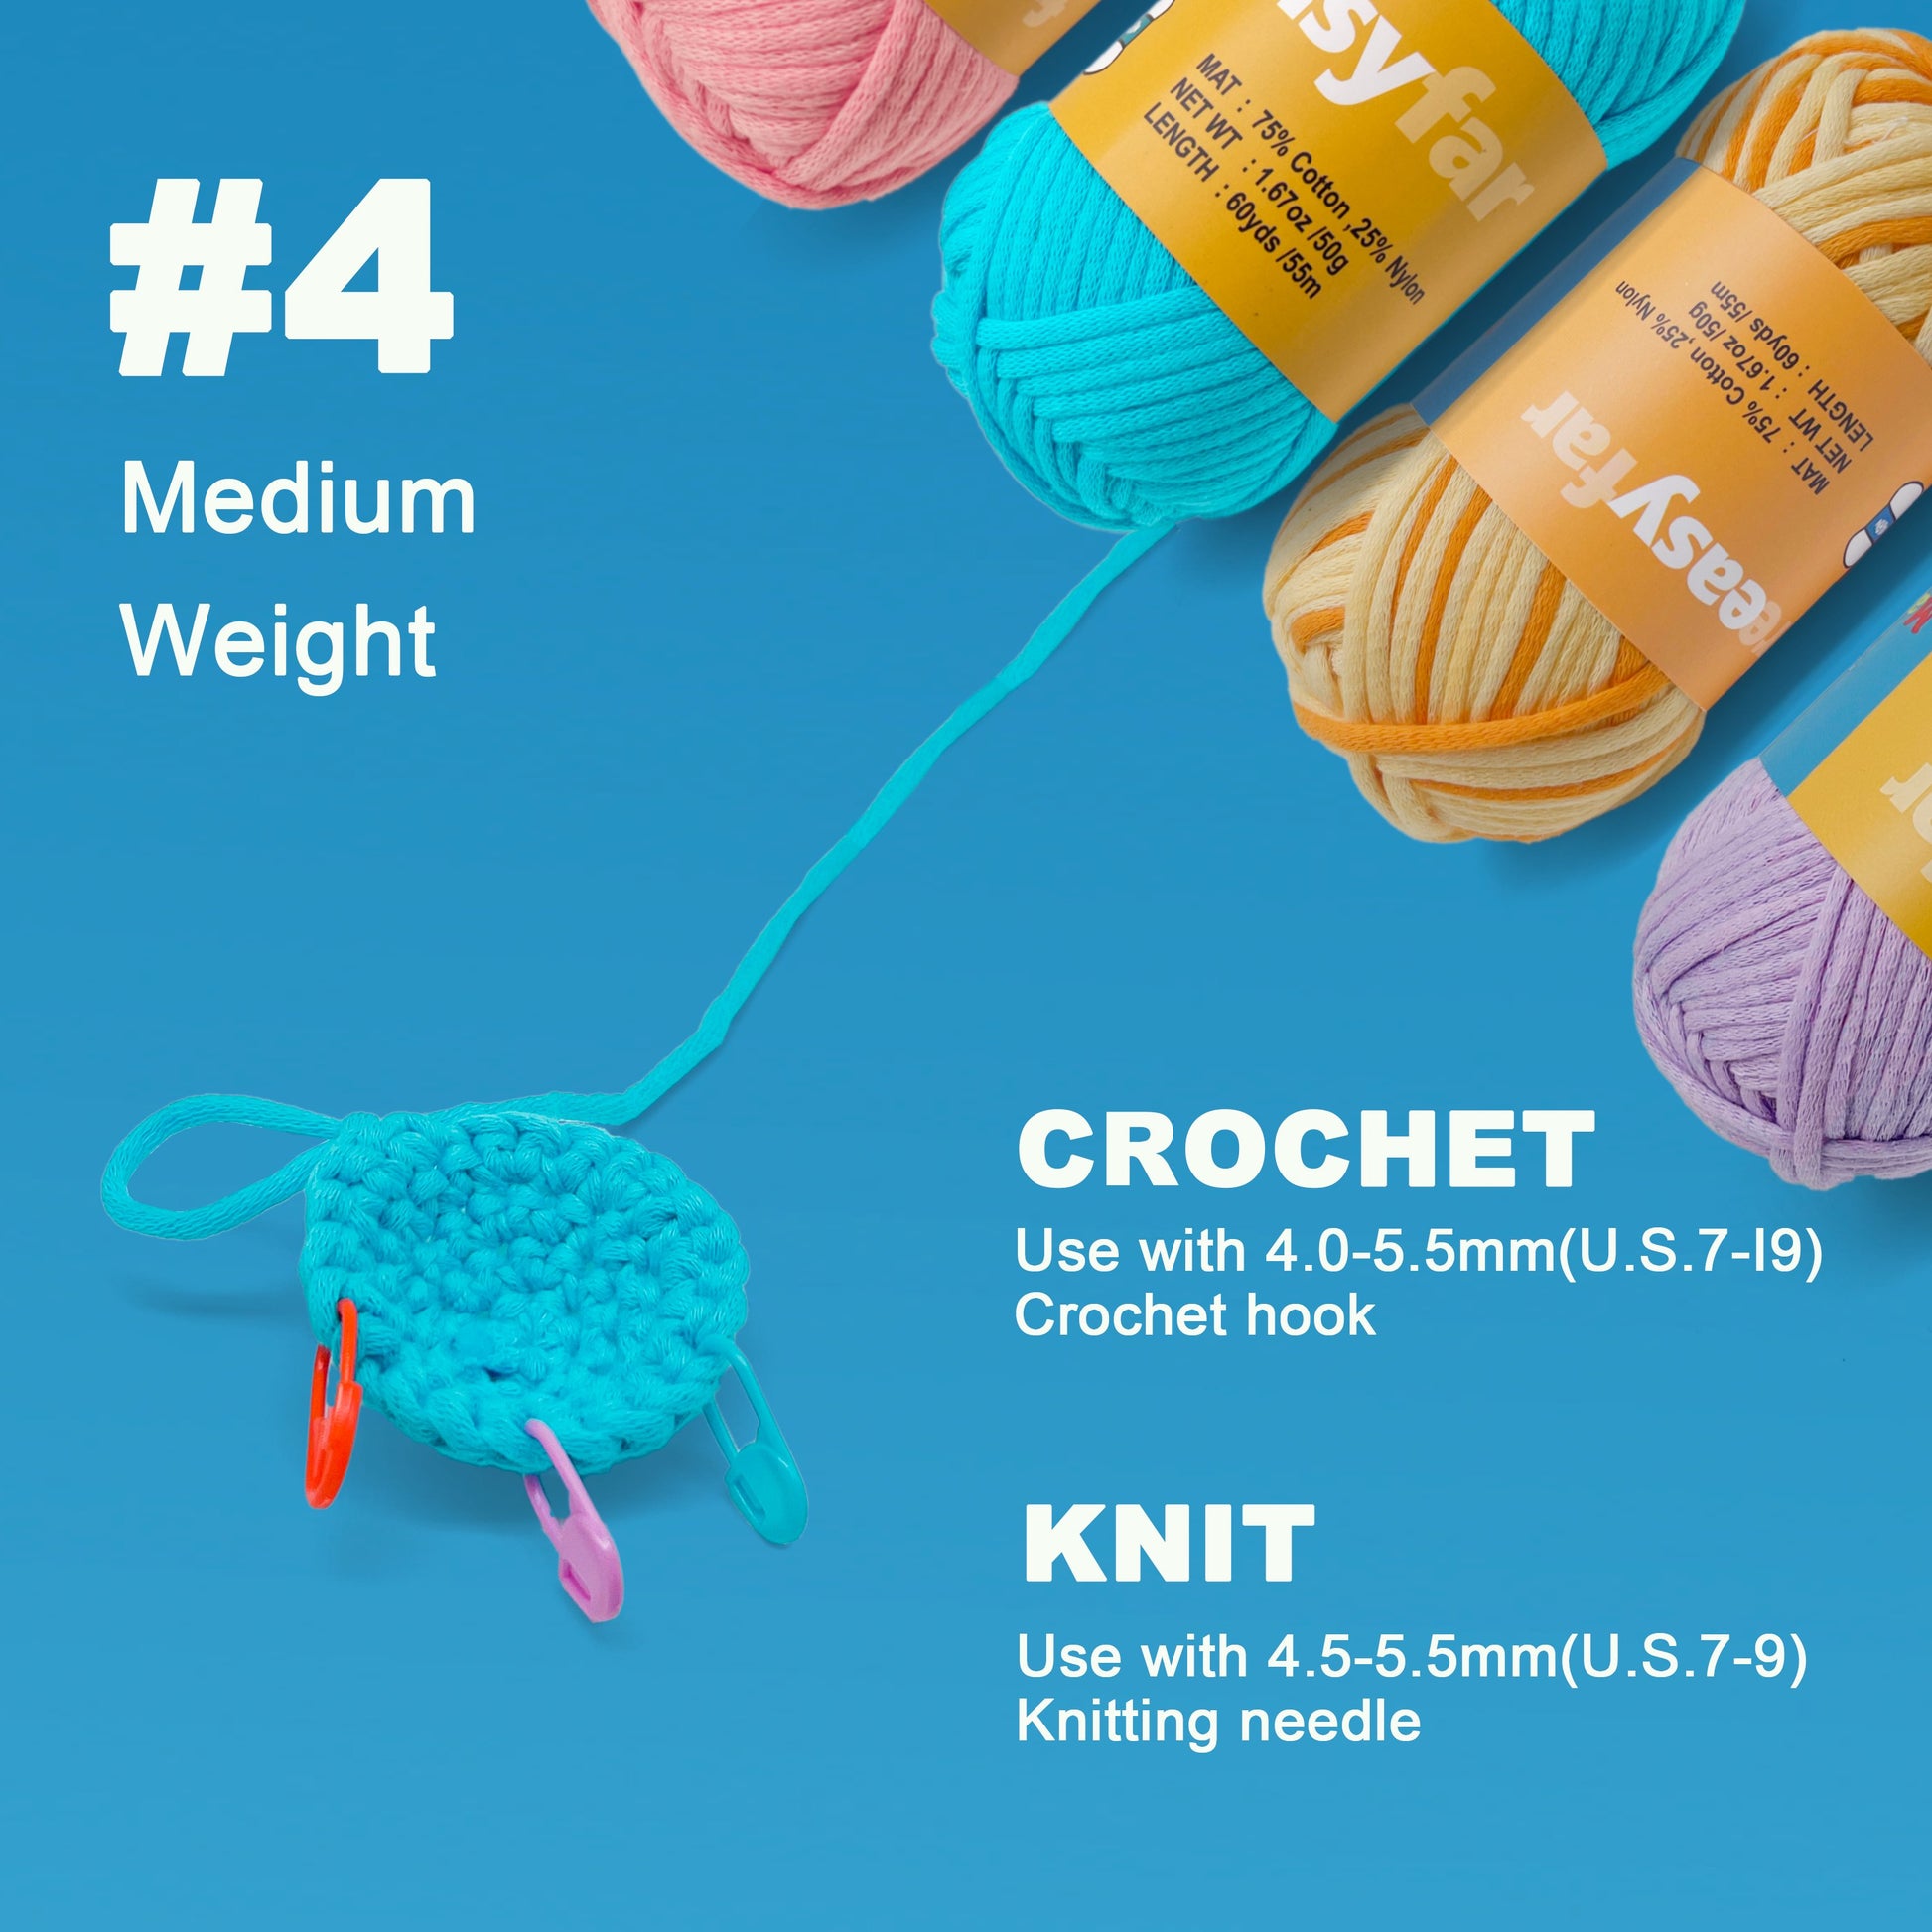  3x60g Brown Yarn for Crocheting and Knitting;3x66m (72yds)  Cotton Yarn for Beginners with Easy-to-See Stitches;Worsted-Weight Medium  #4;Cotton-Nylon Blend Yarn for Beginners Crochet Kit Making